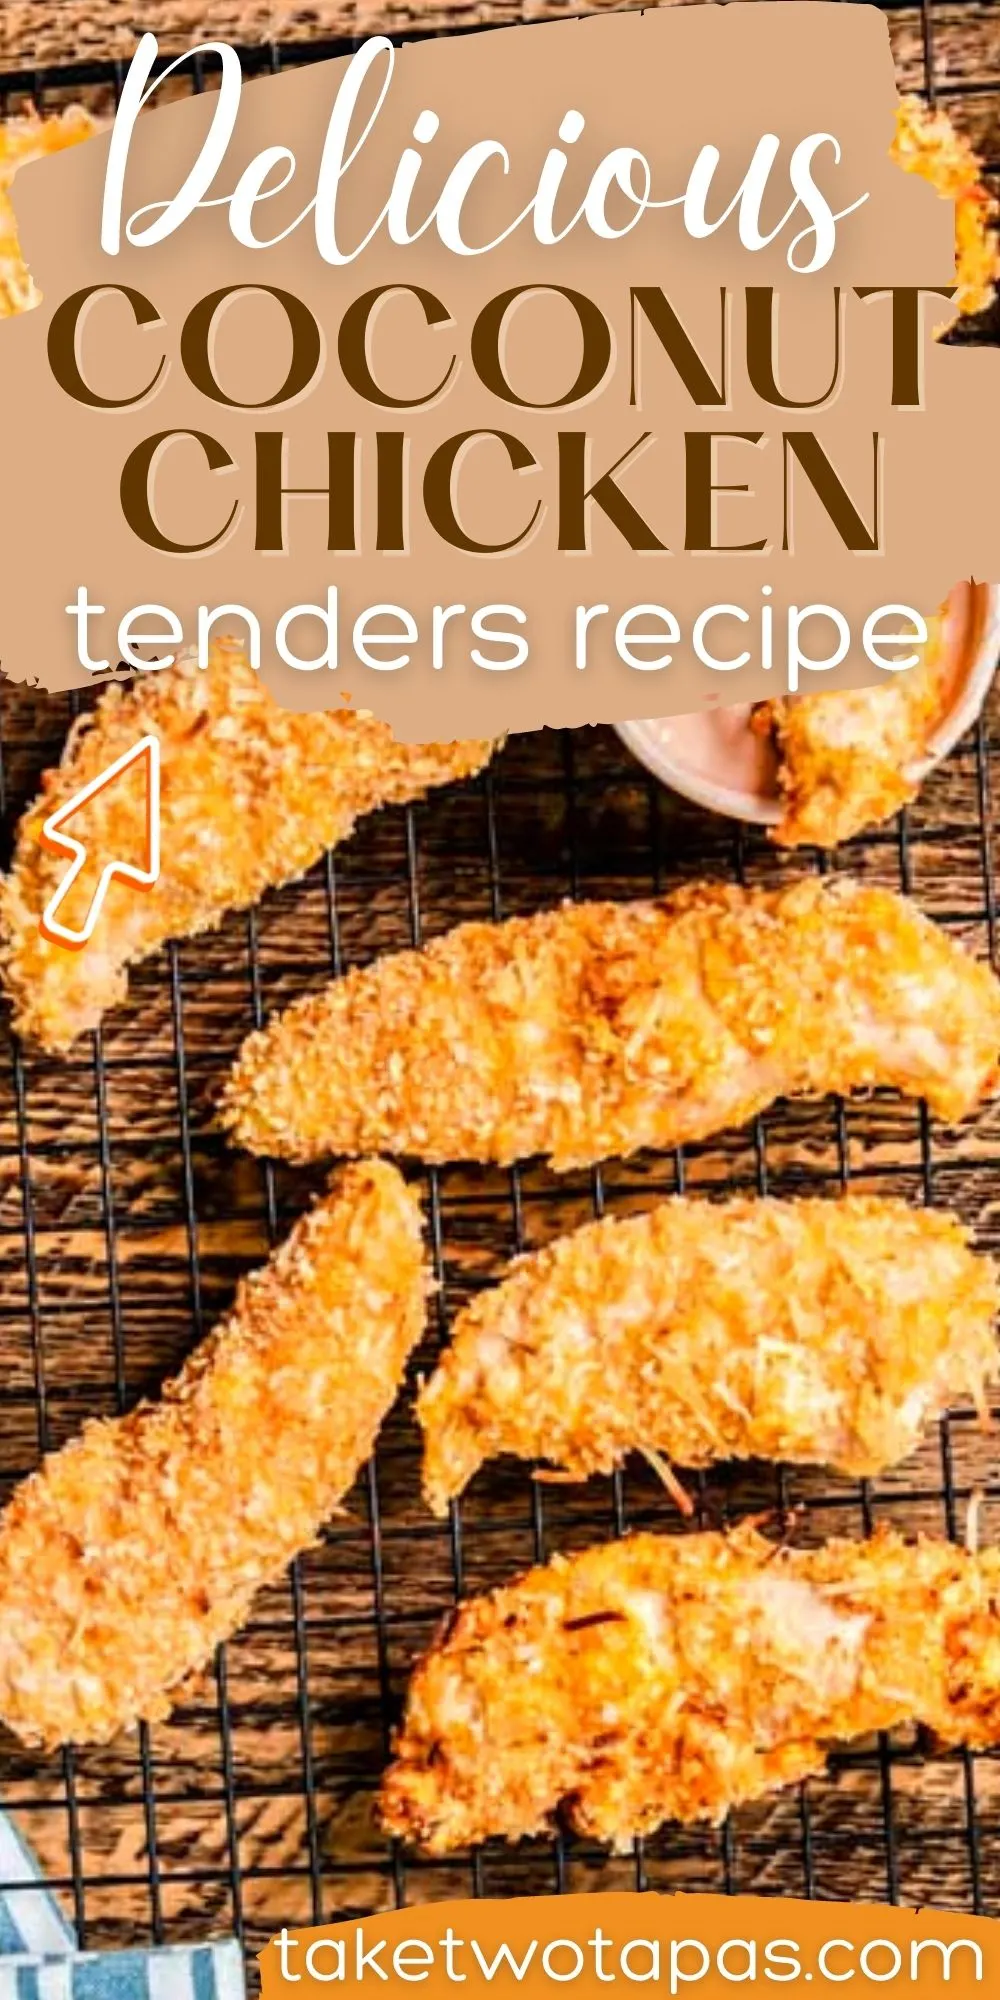 collage of chicken with text "super delicious coconut chicken tenders recipe"